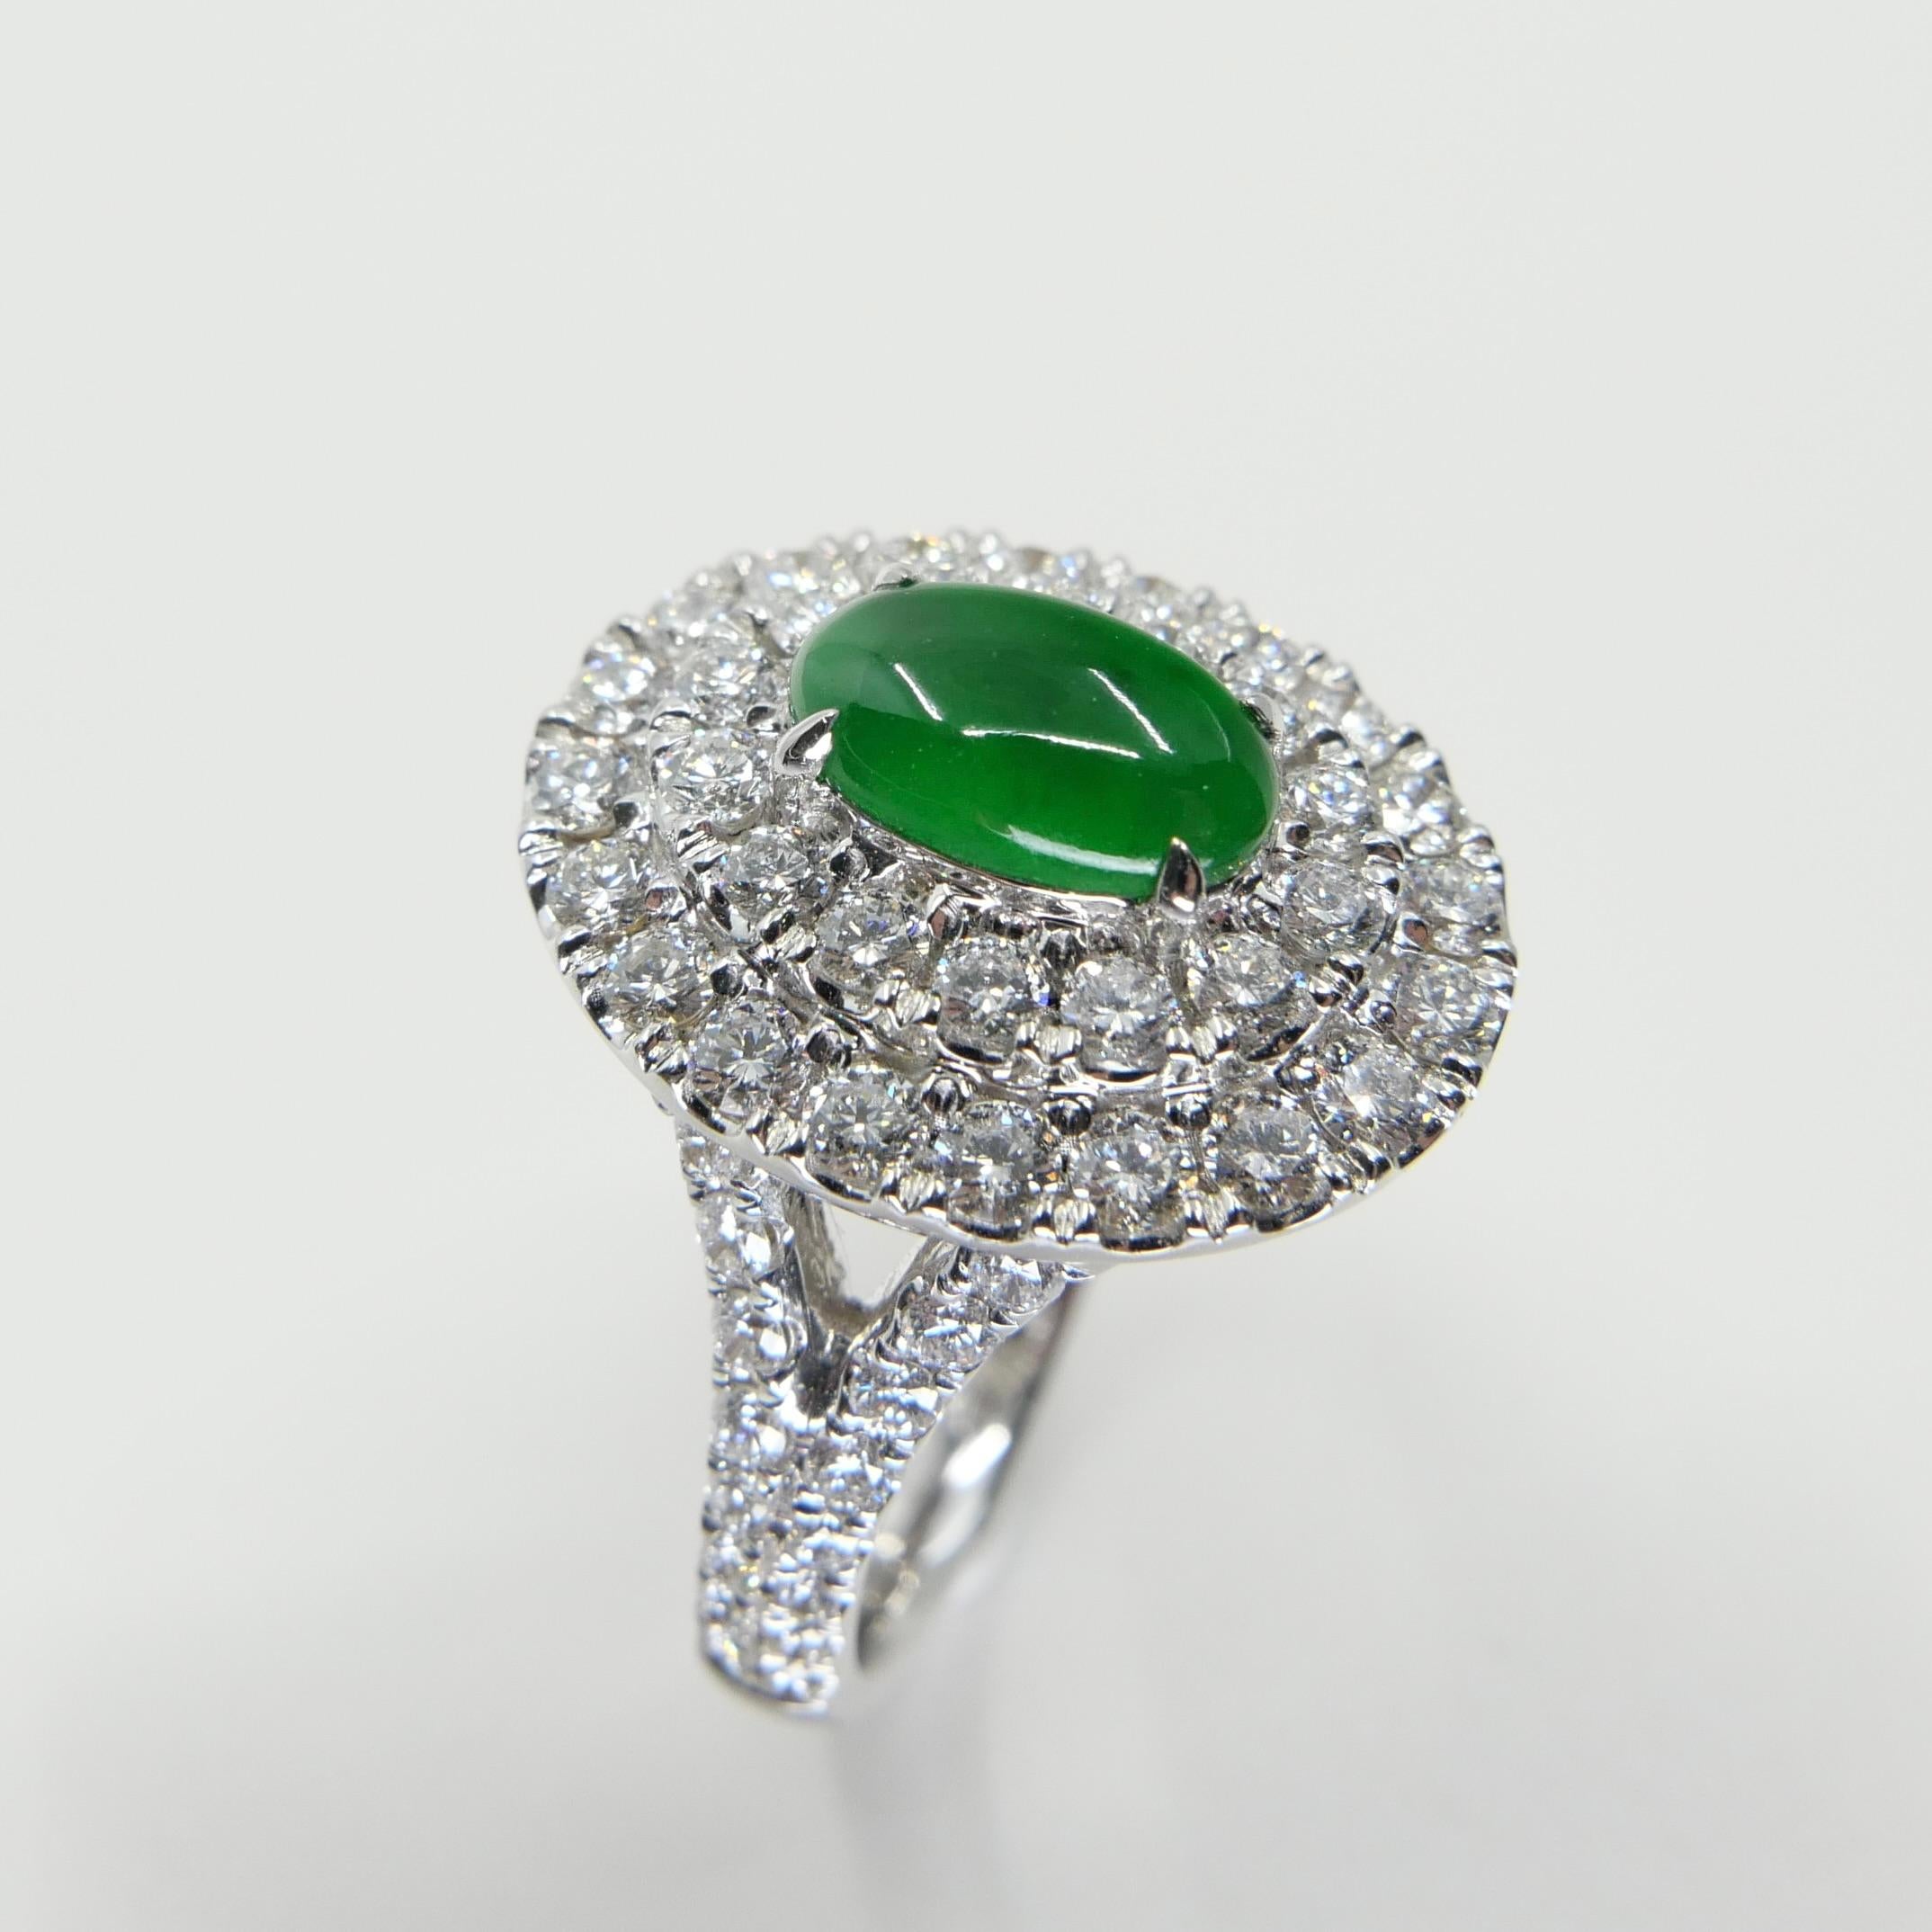 Cabochon Certified Type A Jadeite Jade and Diamond Cocktail Ring, Close to Imperial Jade